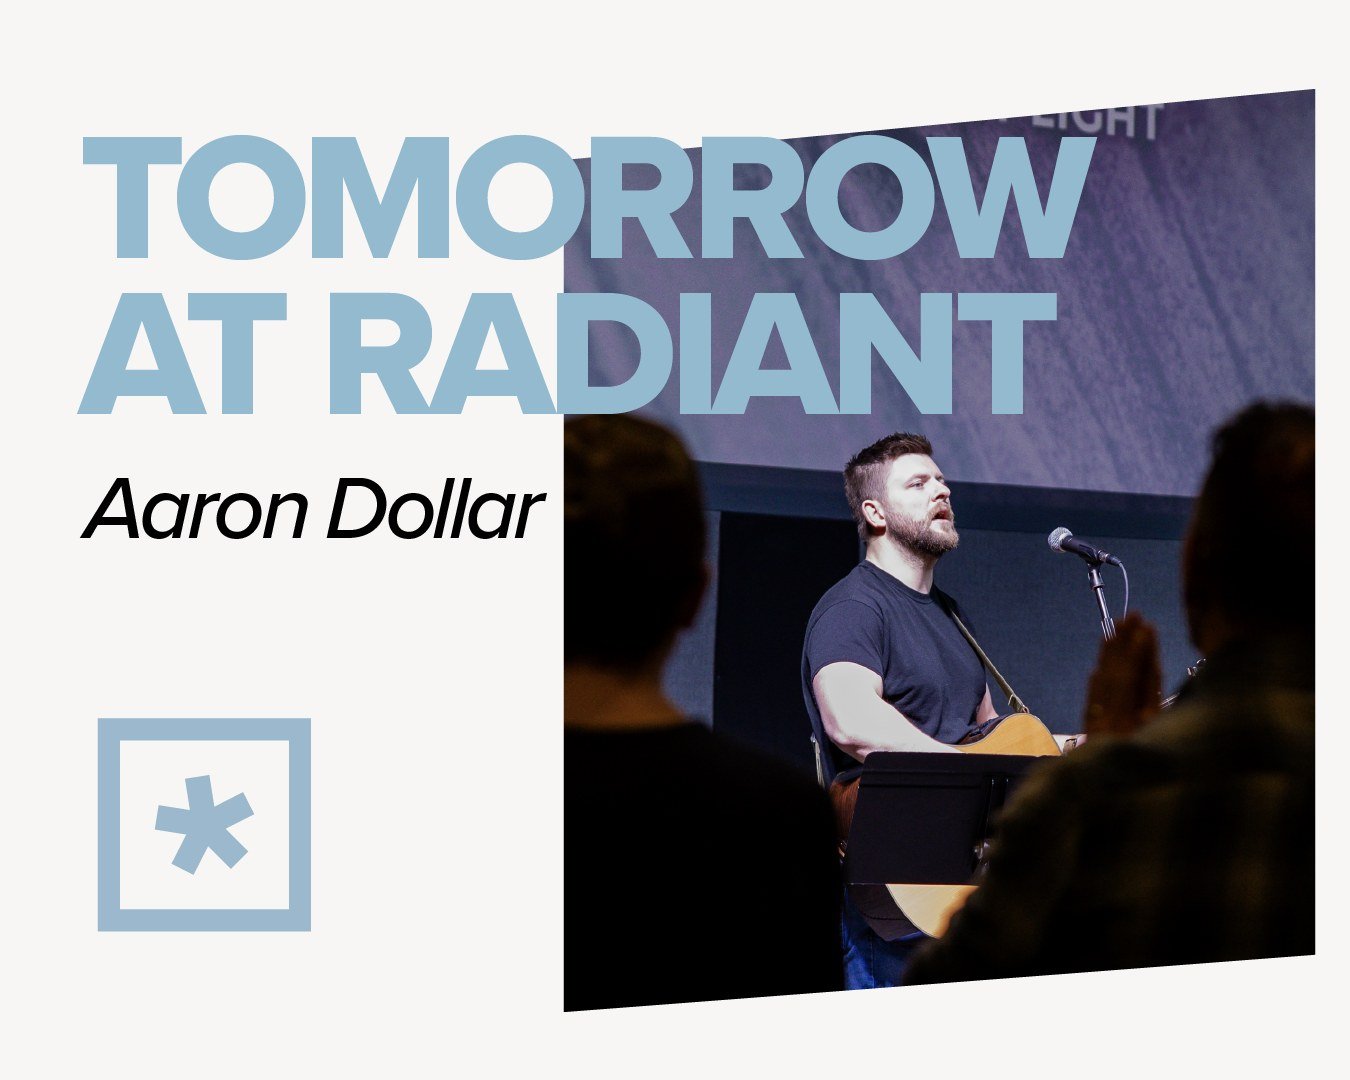 We look forward to hearing from our own Aaron Dollar tomorrow morning at 10am. See you then, Radiant fam! 🩵